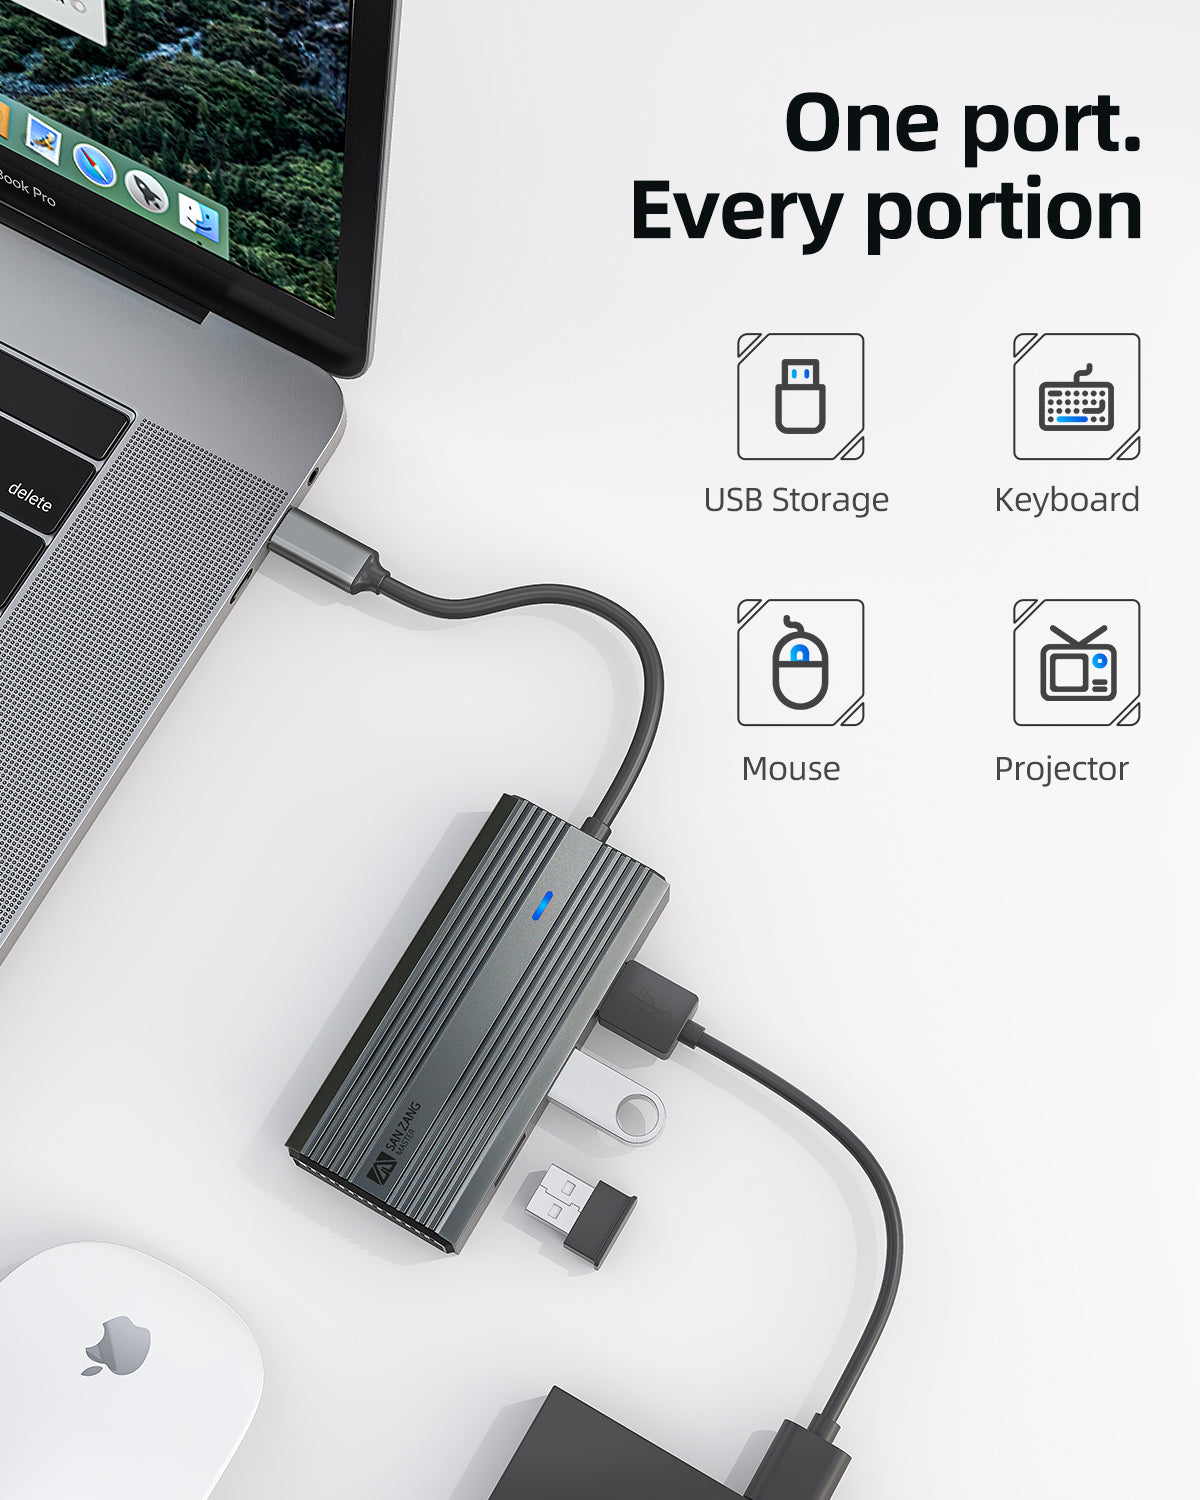 SANZANG Master 5 in 1 USB C Hub, 4k USB C to HDMI Adapter, 5Gbps USB 3.0 High Speed, 2 x 480Mbps USB Ports, Type-C 60W Fast Charging for MacBook